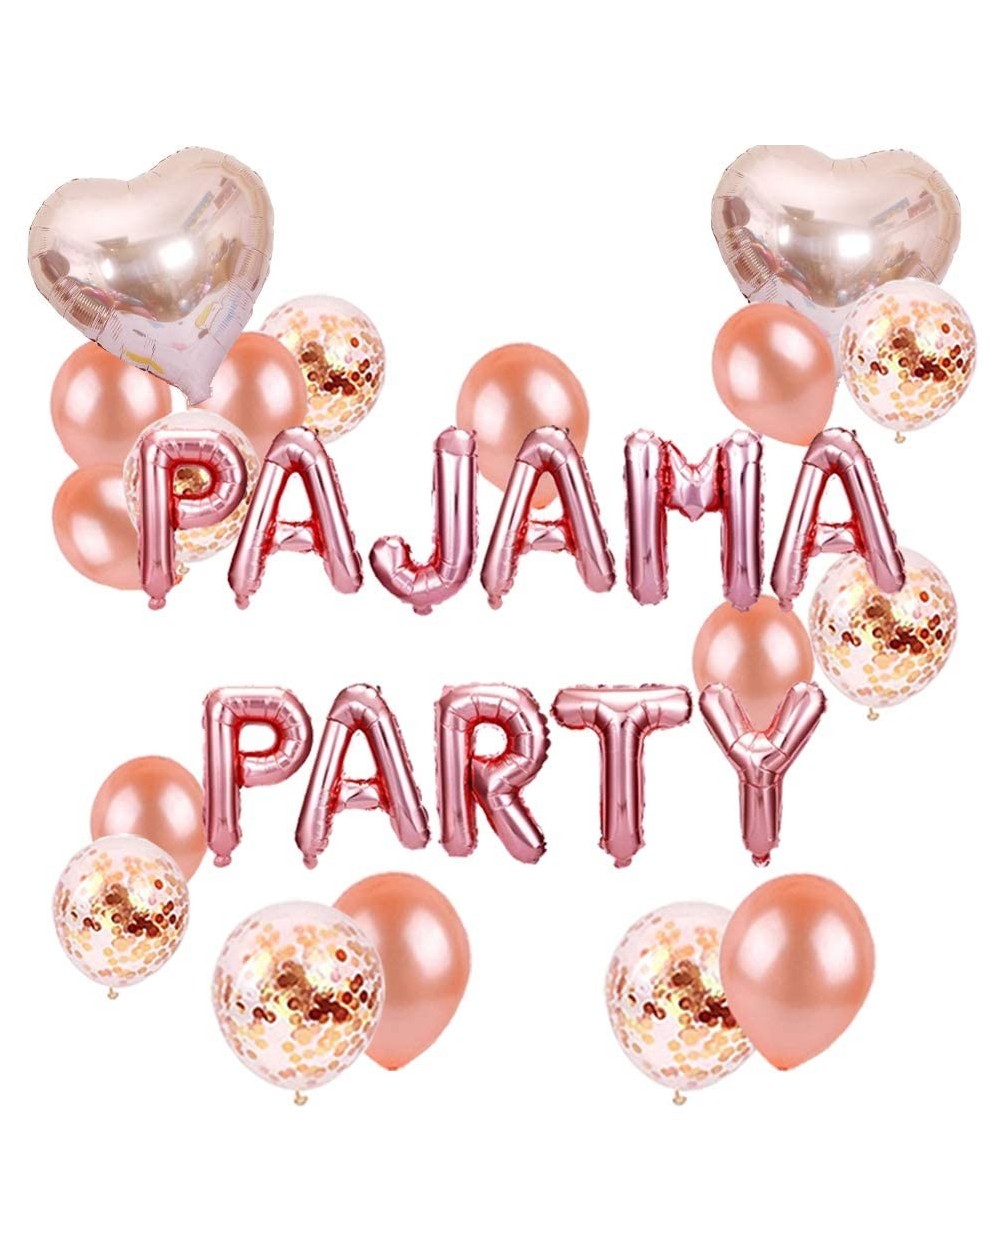 Balloons Adult Pajama Party Decorations Rose Gold PAJAMA PARTY Banner Balloons Supplies For Woman Girls Sleep Party - CD19CIO...